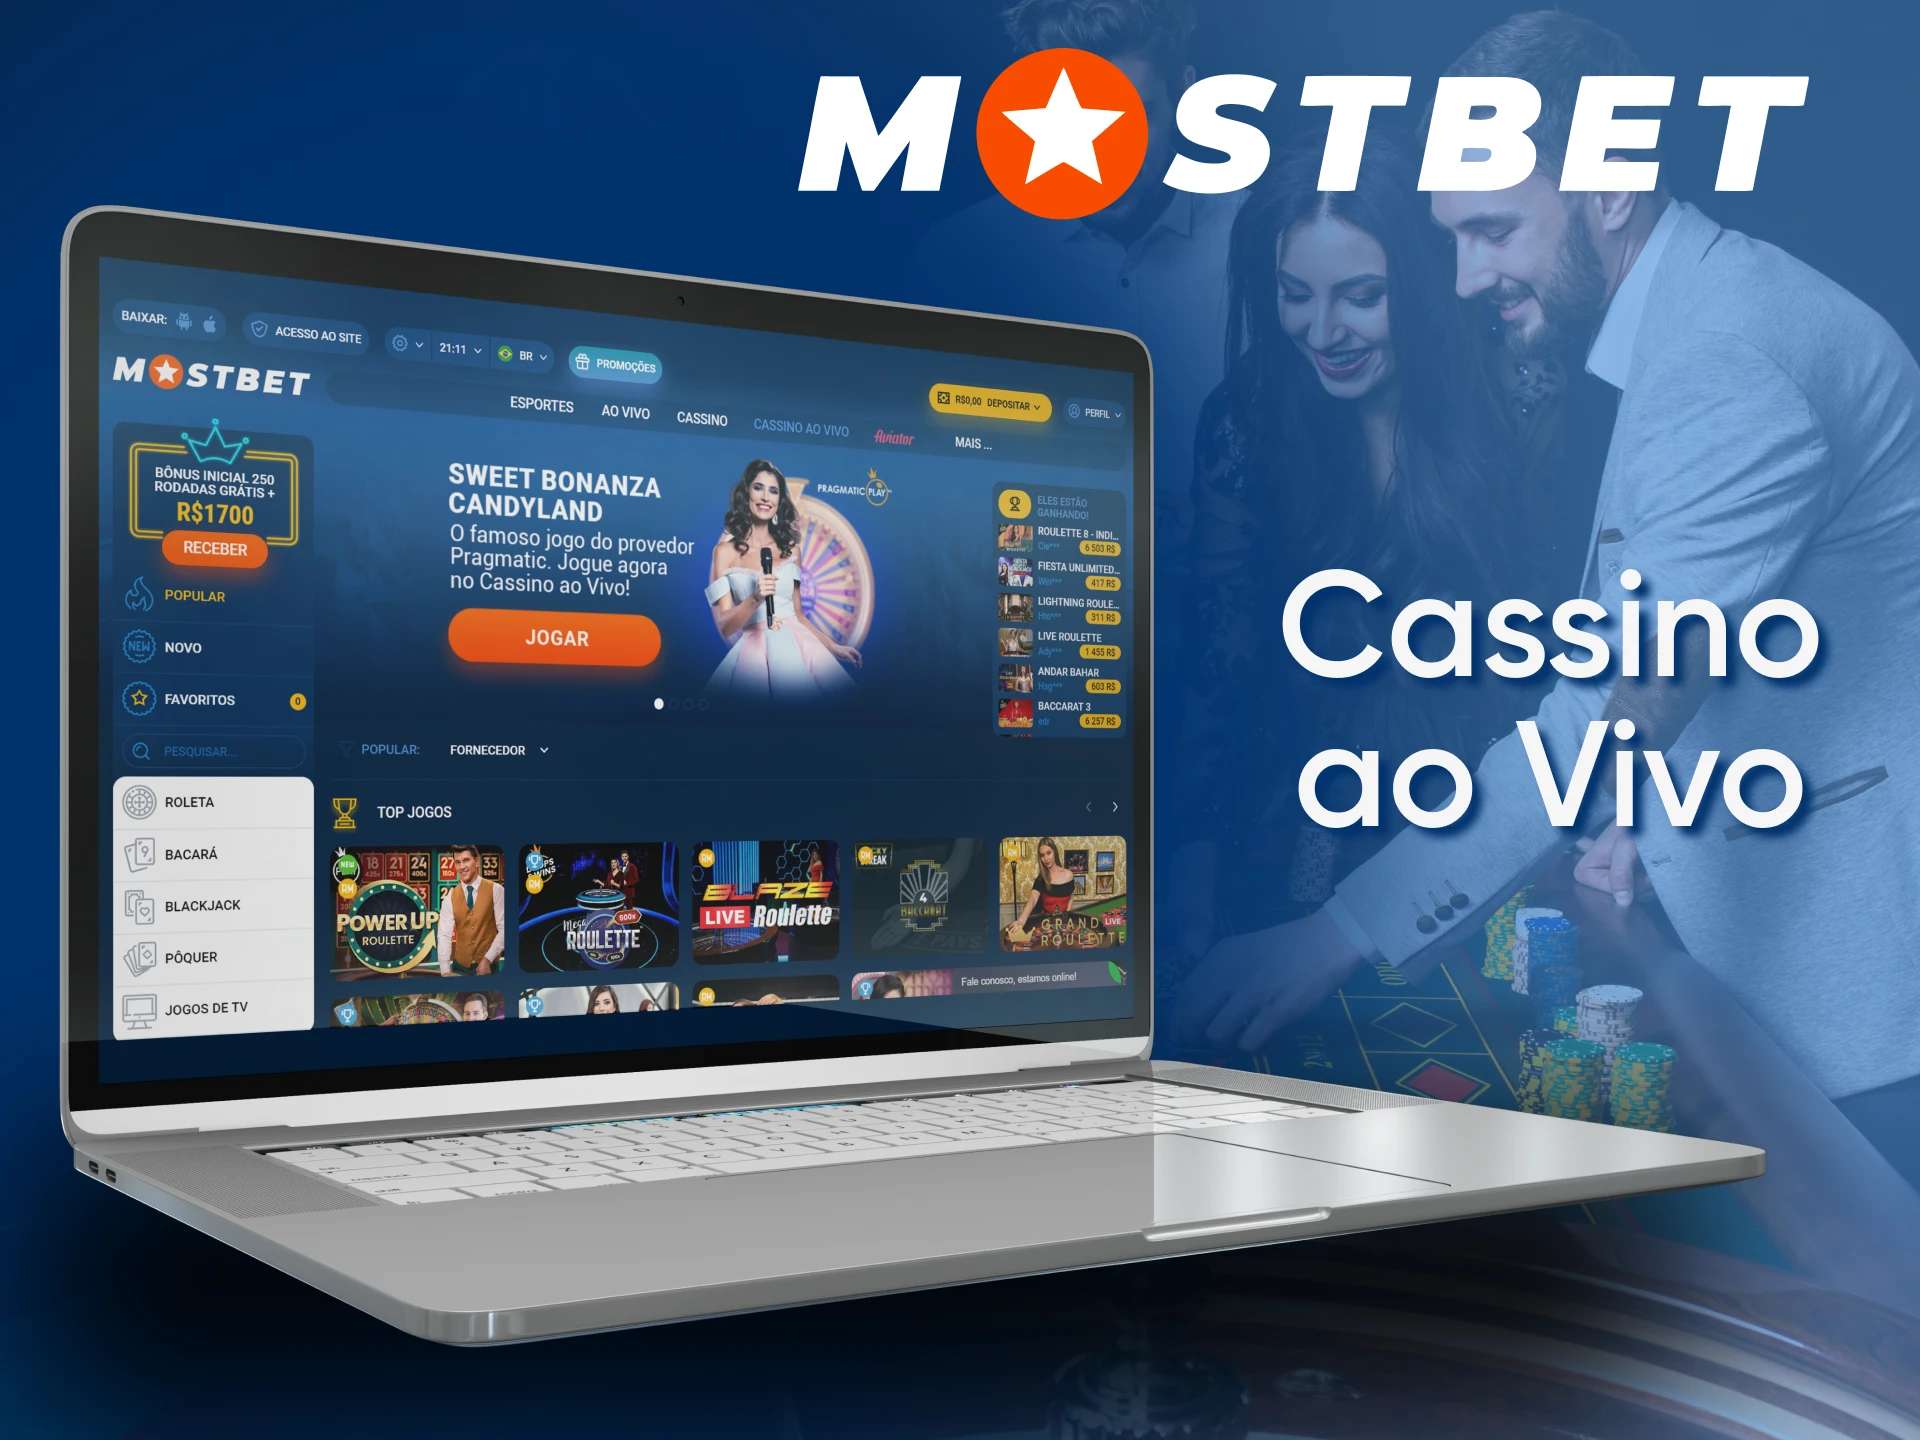 Bet with Mostbet on live casino games.